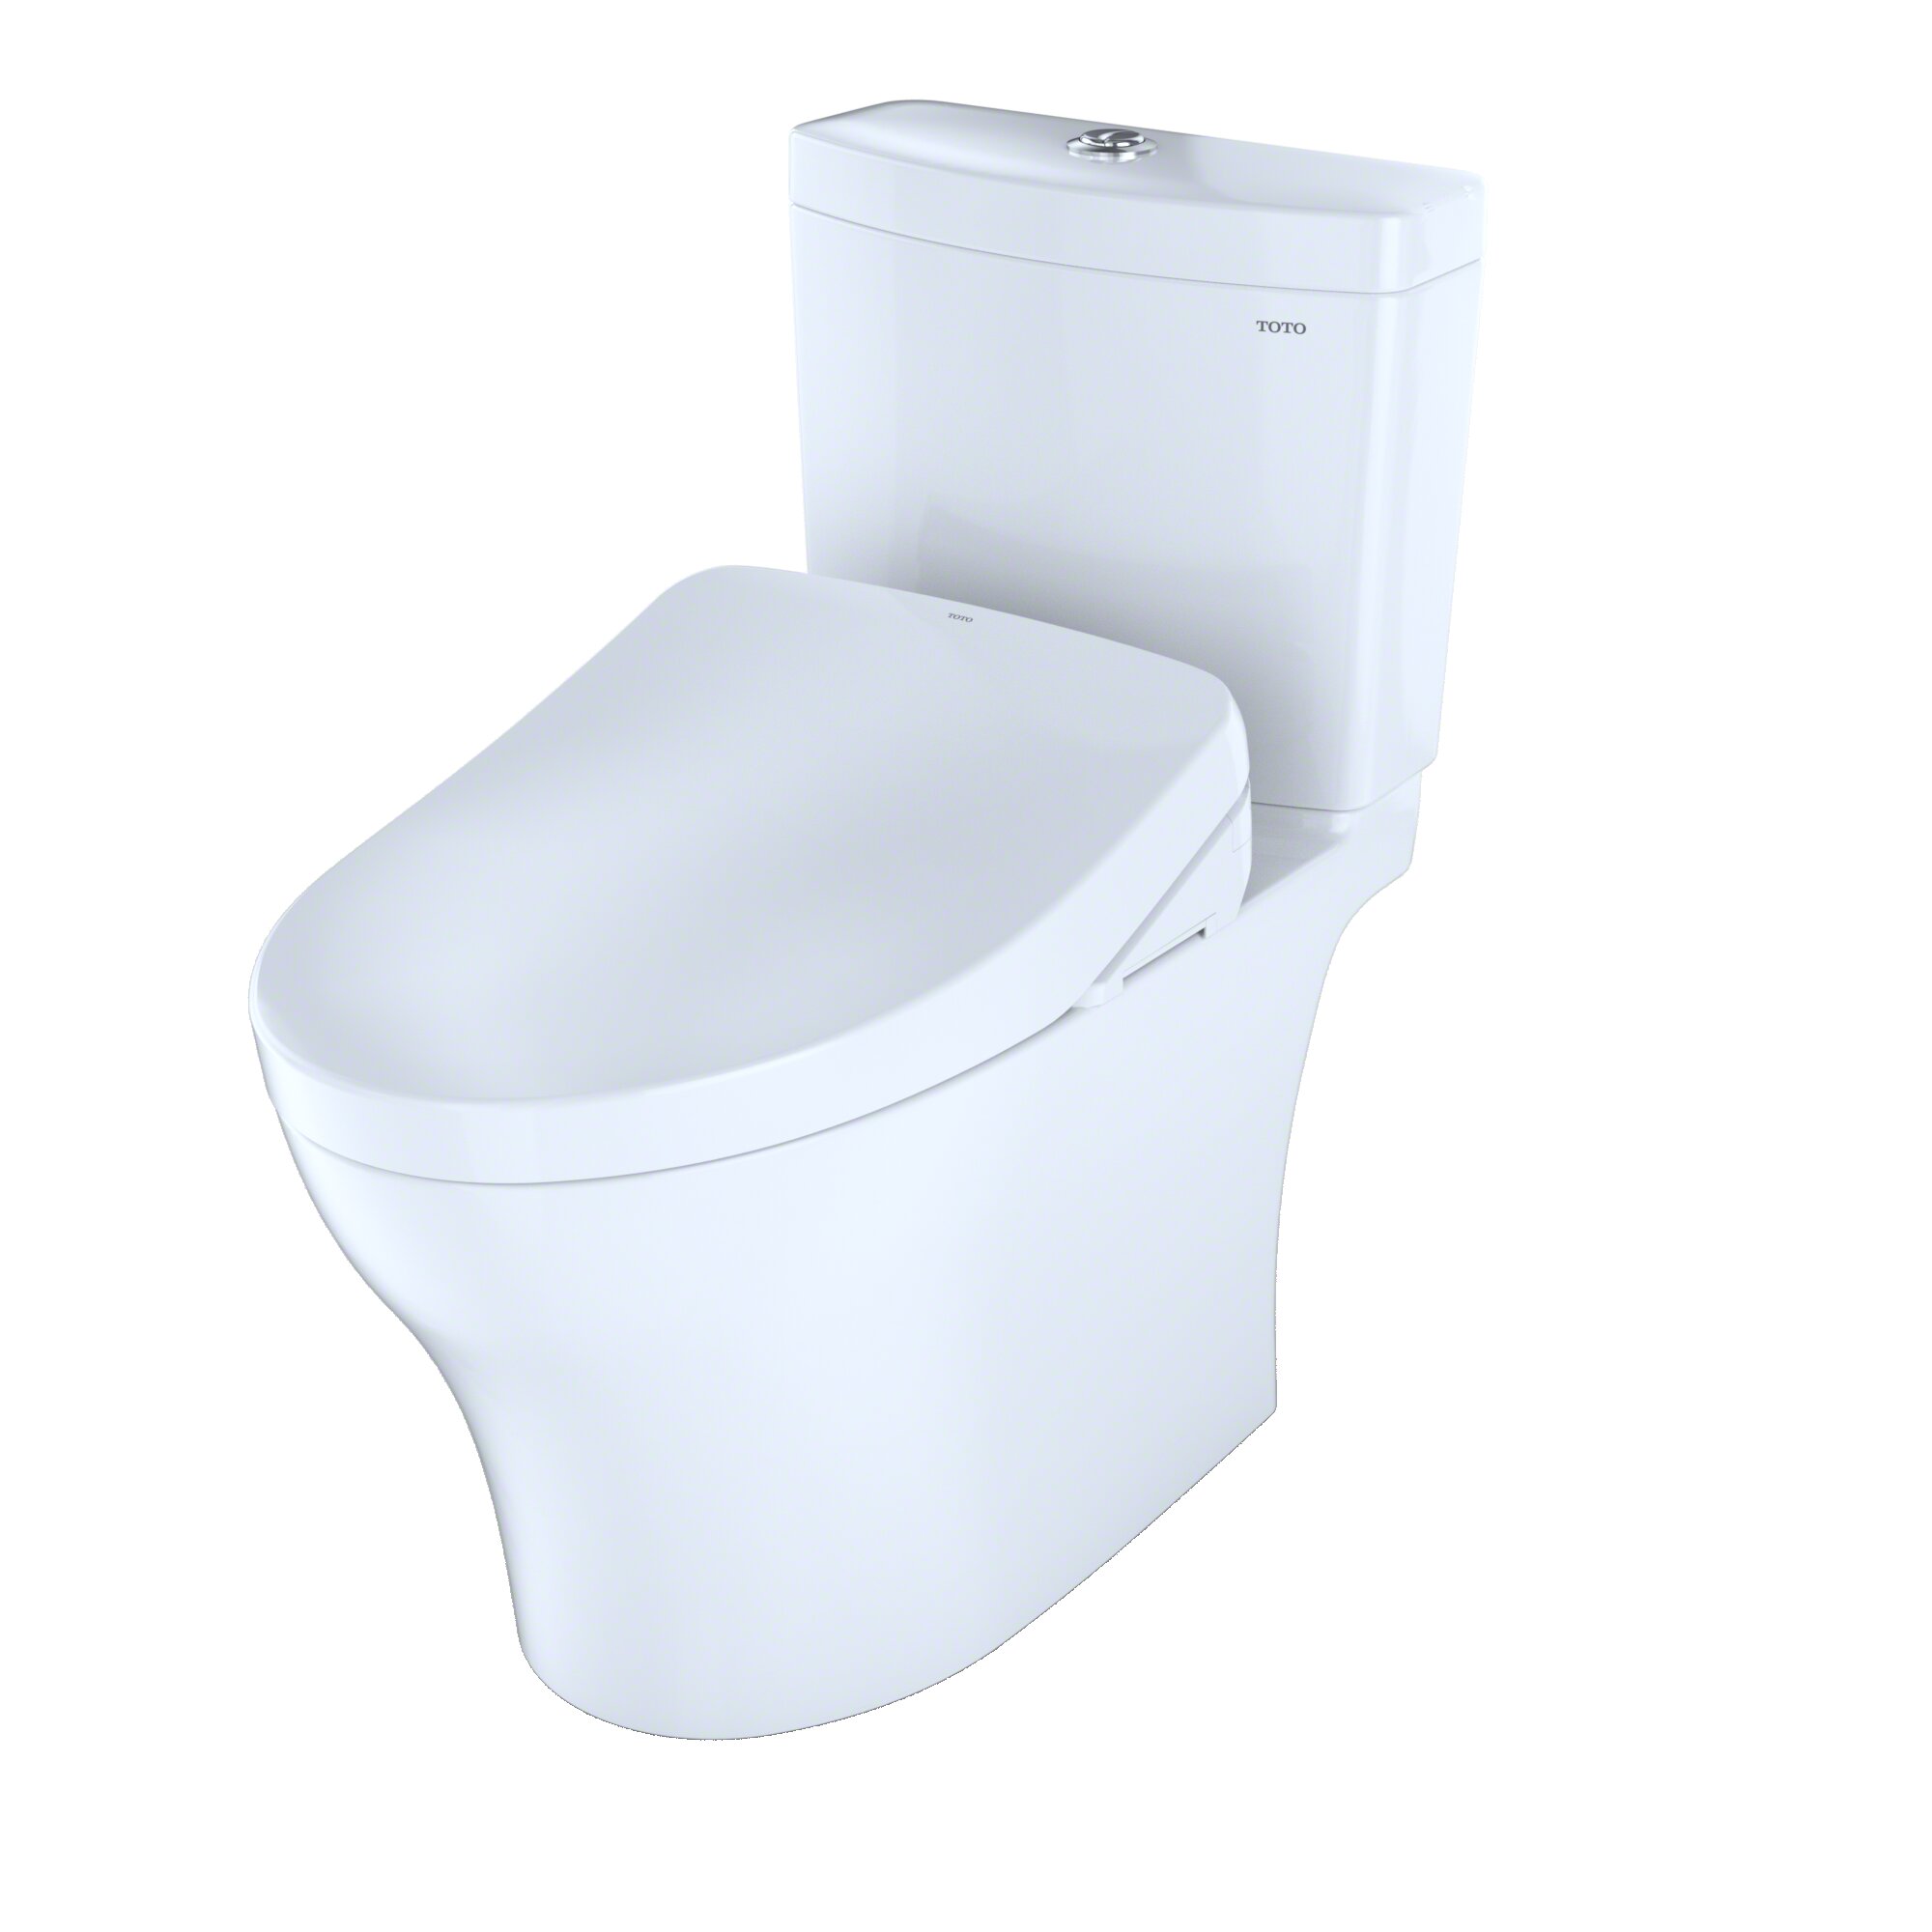 What Is Automatic Toilet Flusher And How Does It Work - KEGE